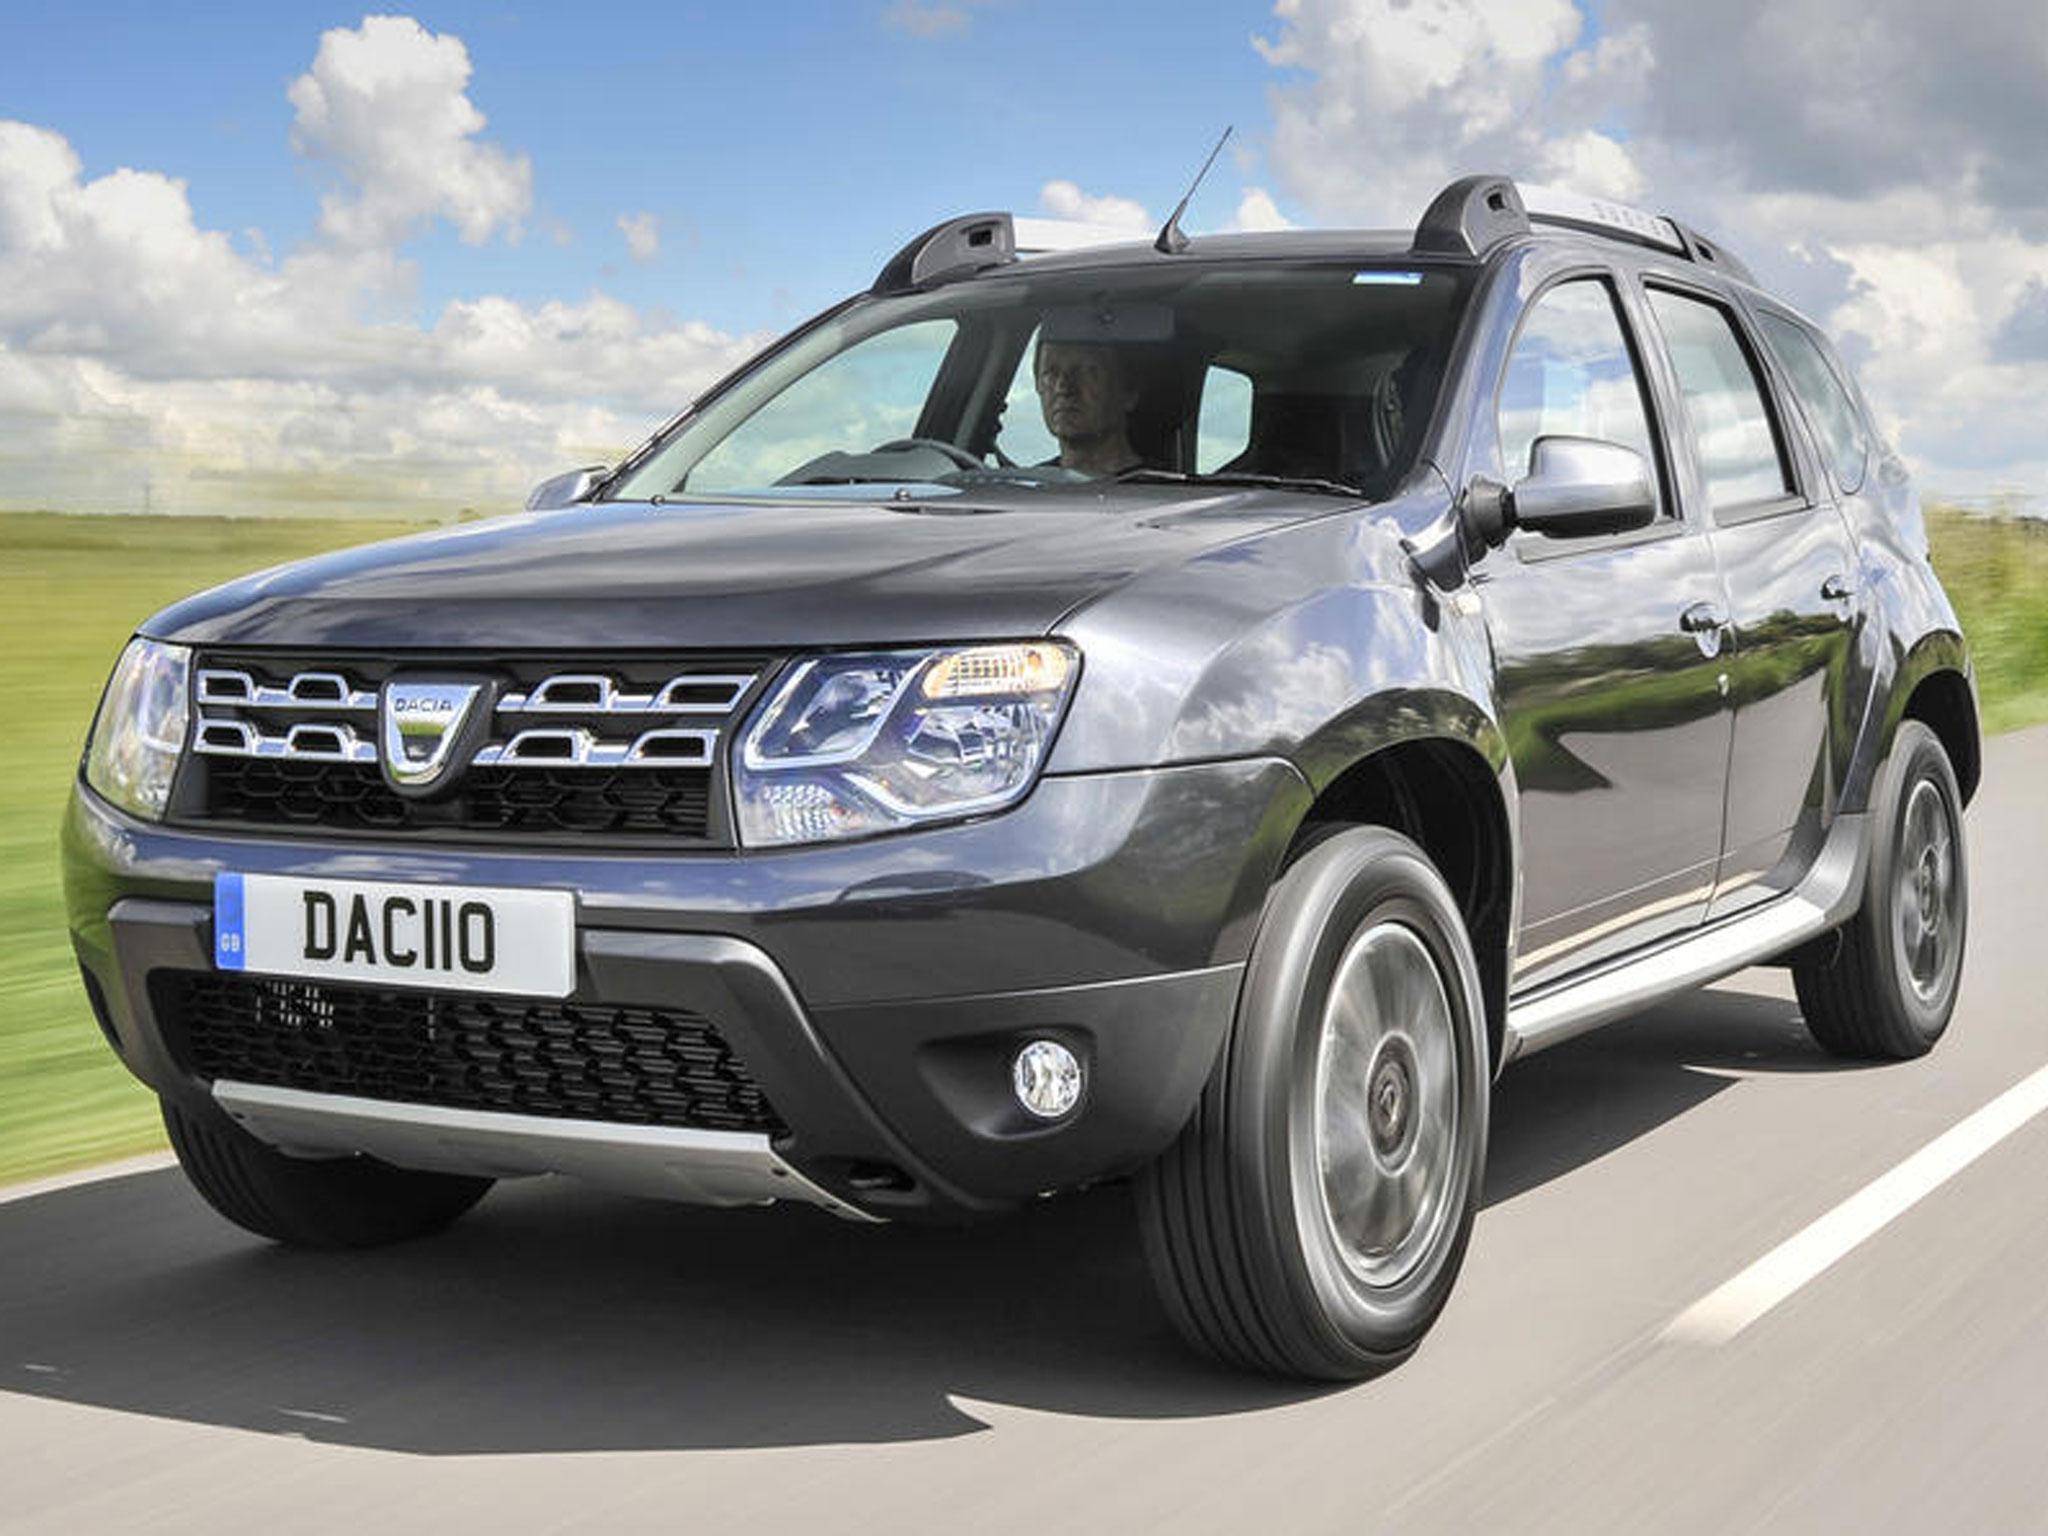 The model line-up kicks off with the £9495 Access model – the top dCi 110 4x4 Prestige is £16,495